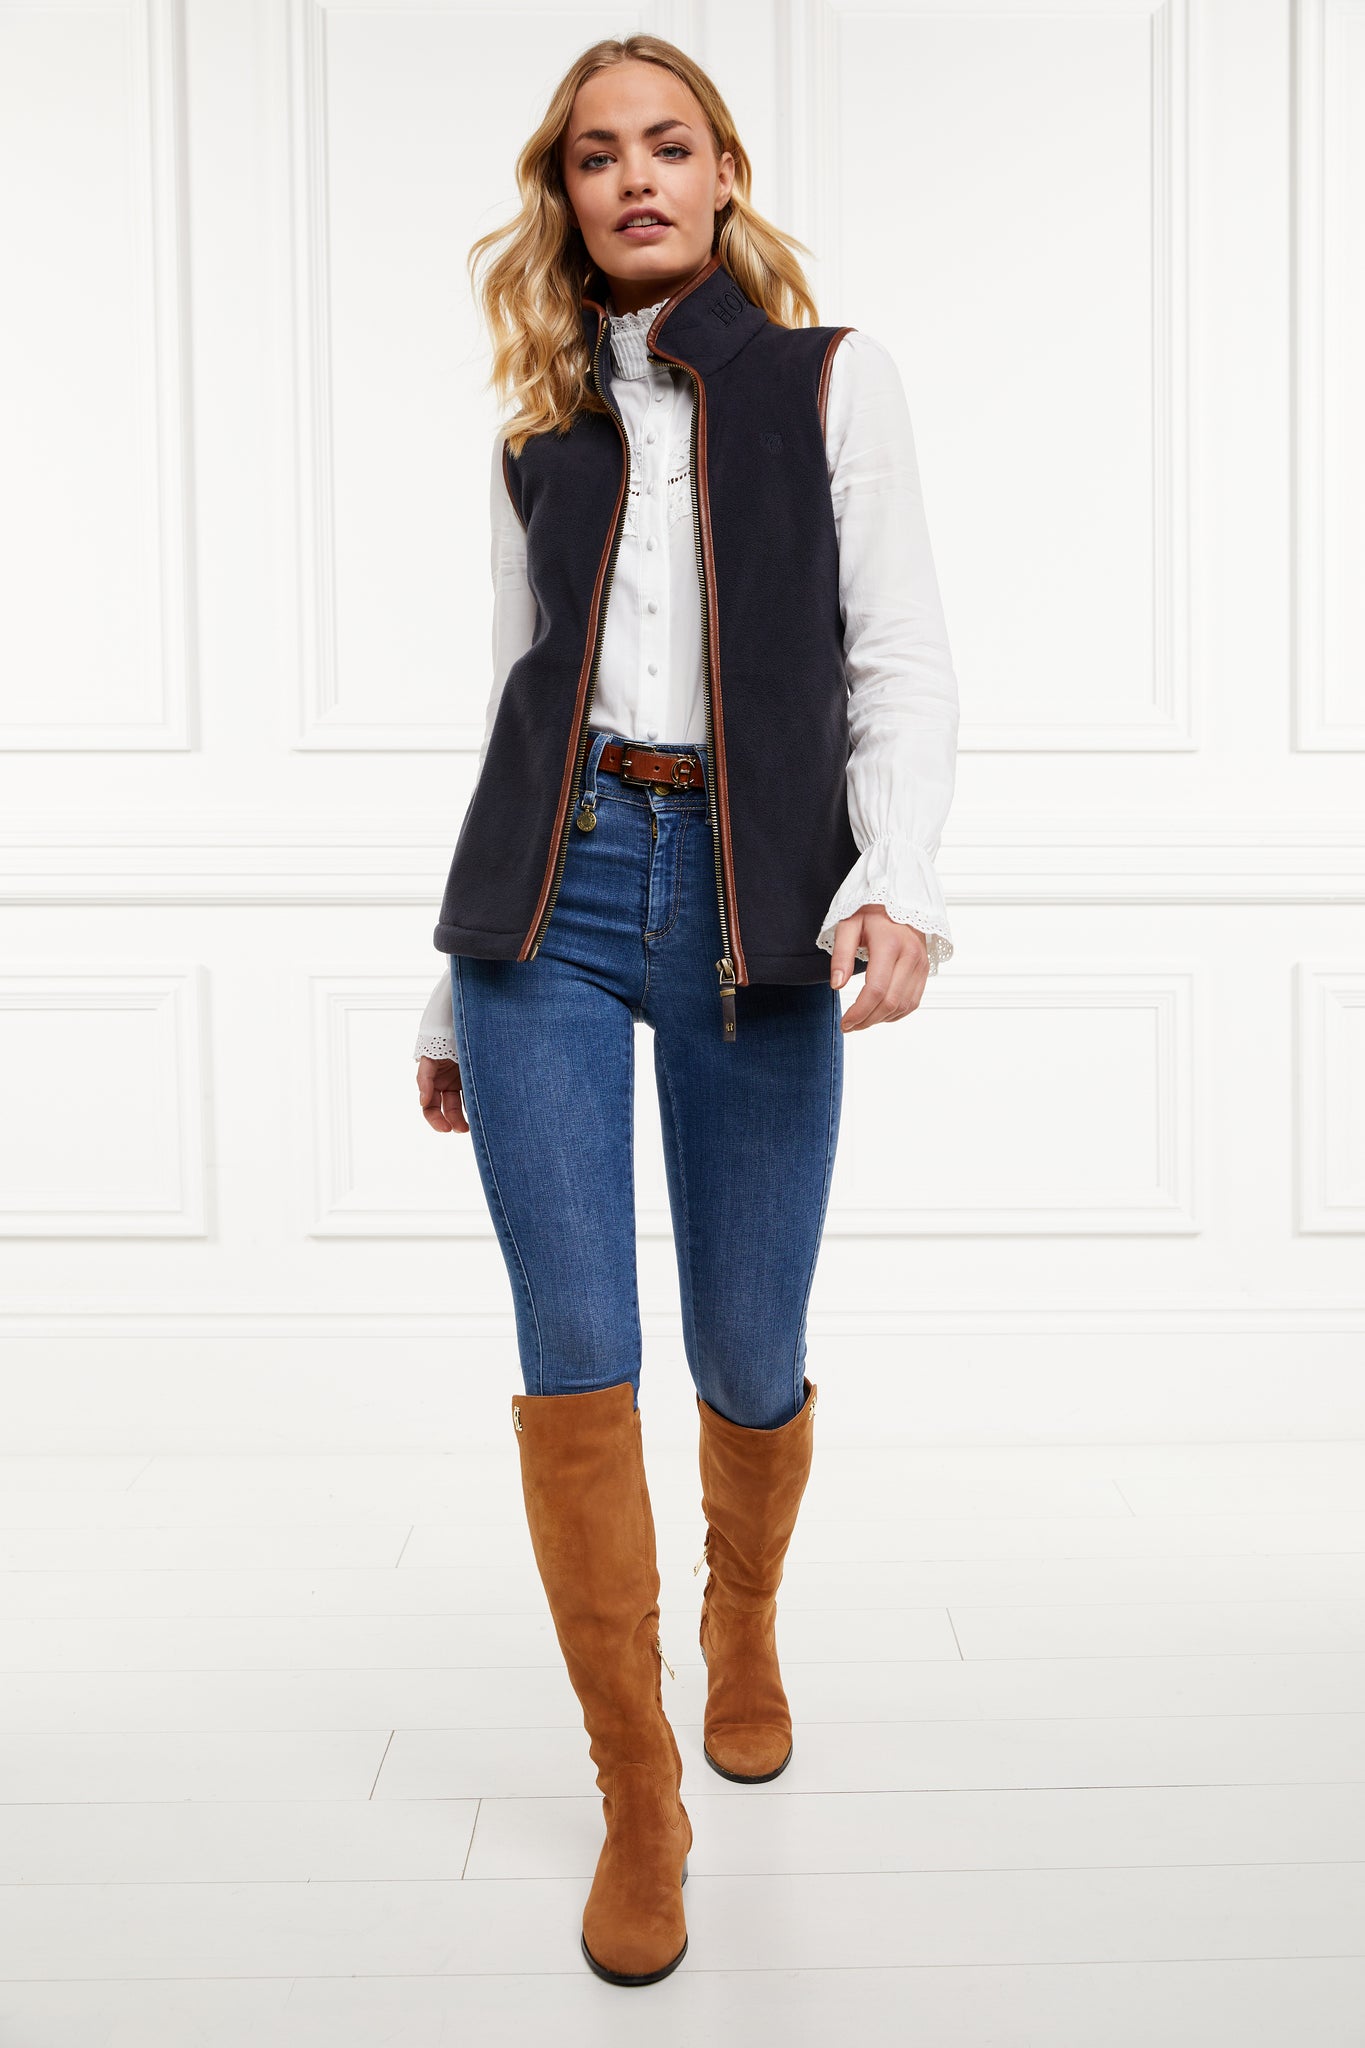 womens fleece gilet in navy with dark brown leather piping around armholes neckline and down the front zip fastening worn with a white shirt dark denim jeans a dark brown belt and tan suede knee high boots